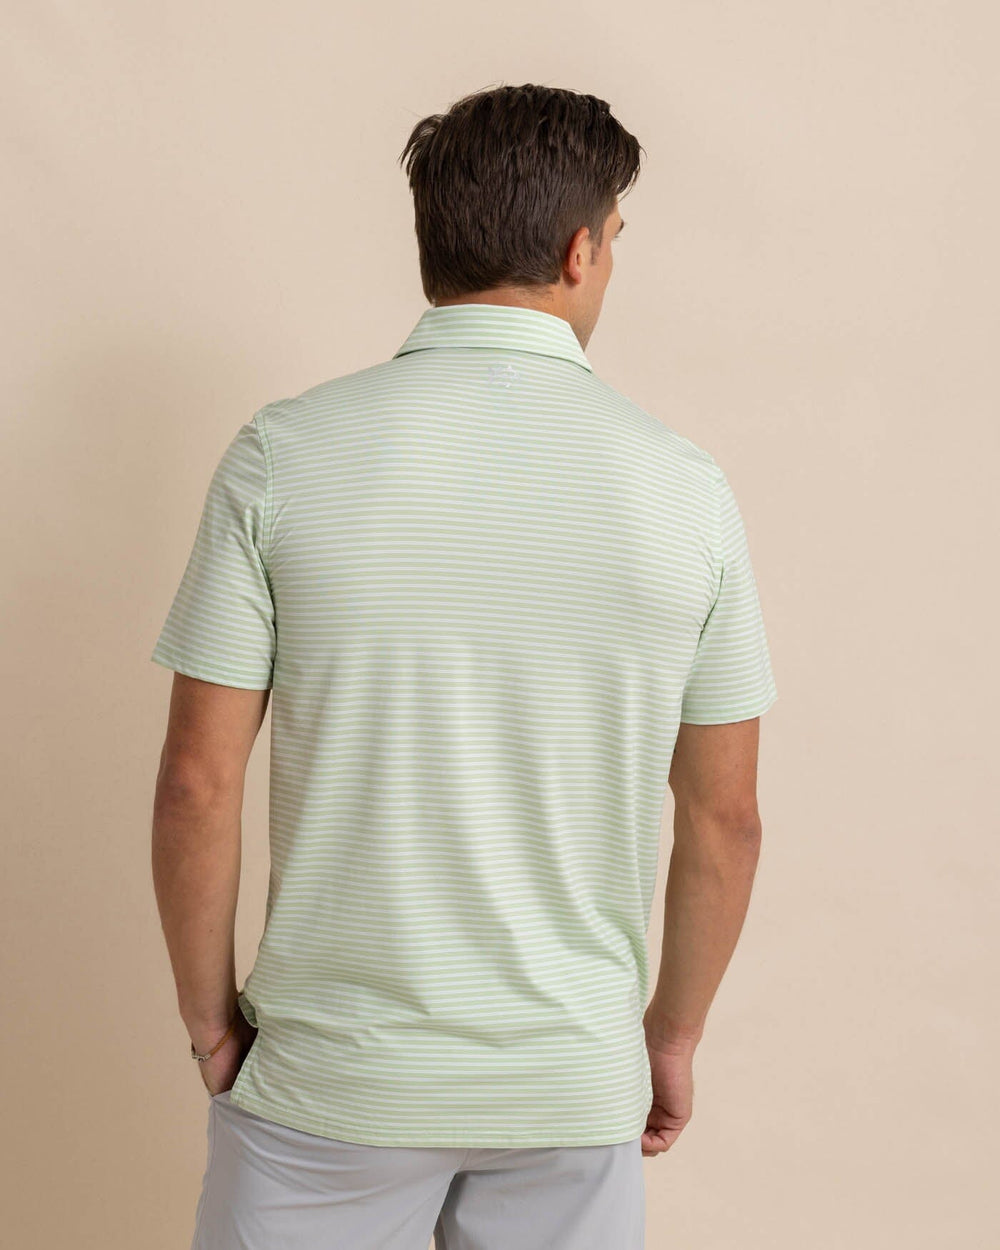 The back view of the Southern Tide brrr eeze Beattie Stripe Performance Polo by Southern Tide - Smoke Green